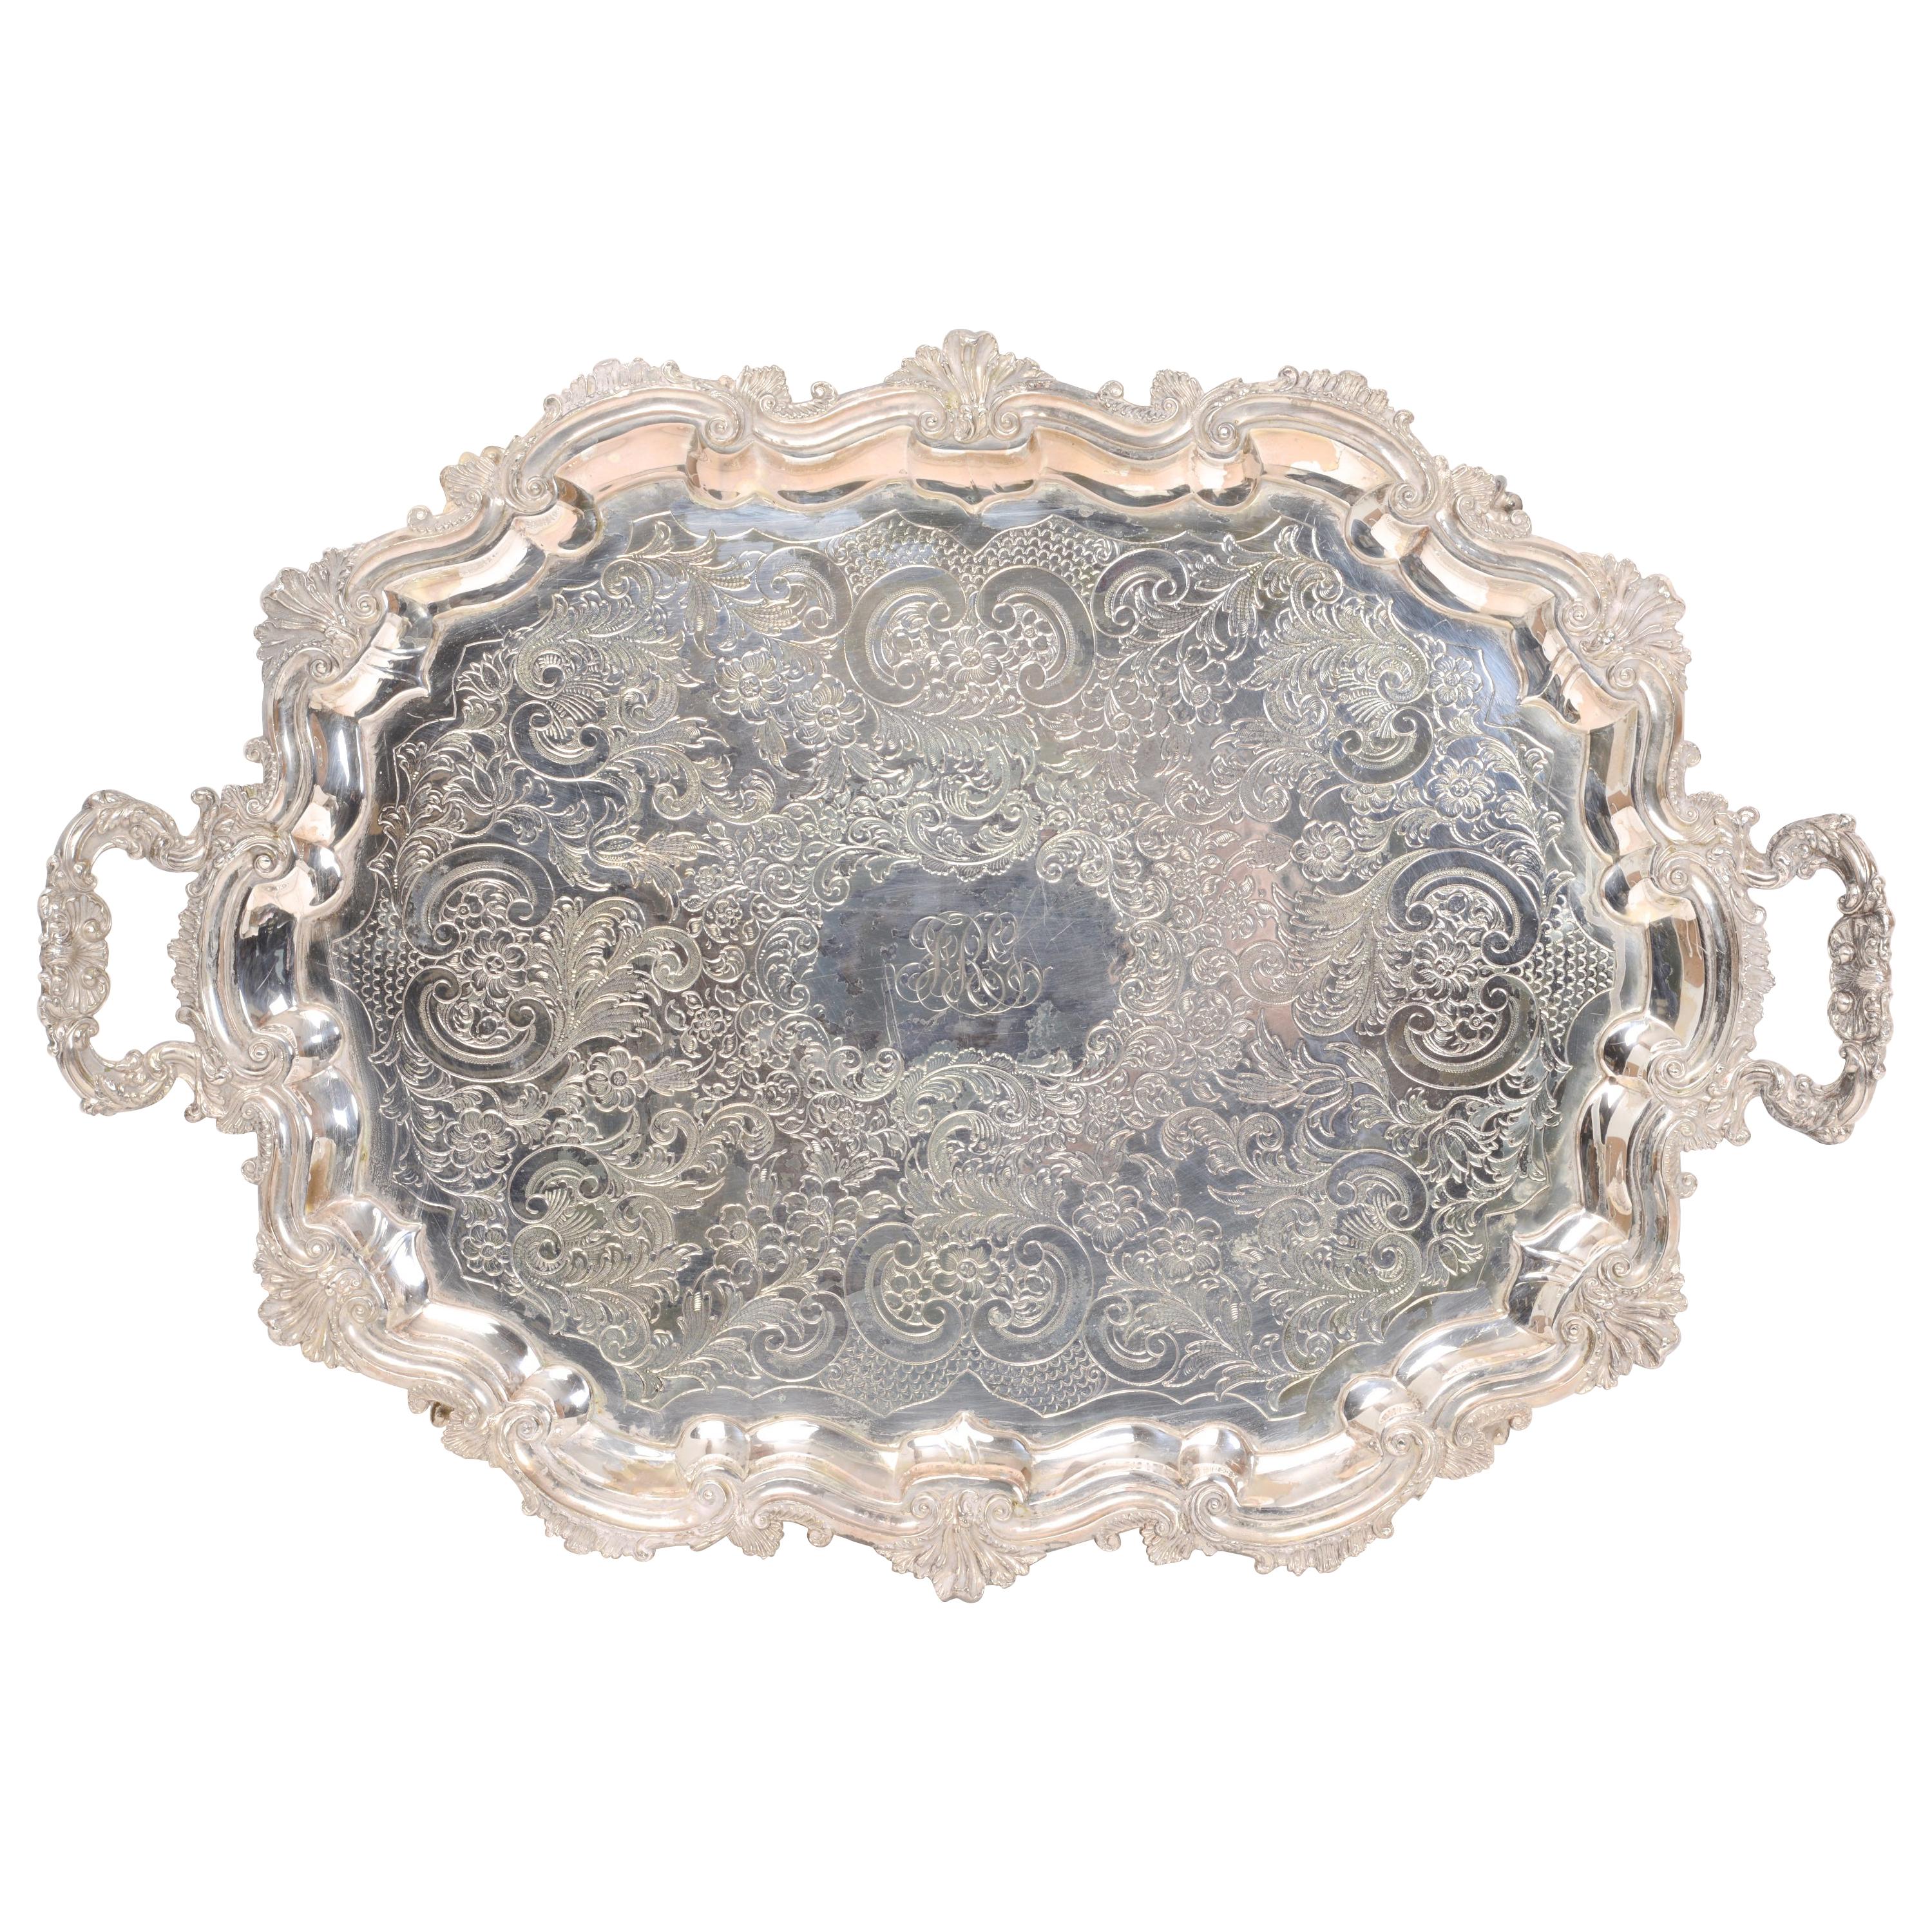 Large Antique Silver Plated Serving Tray with Incised Floral Decoration For Sale